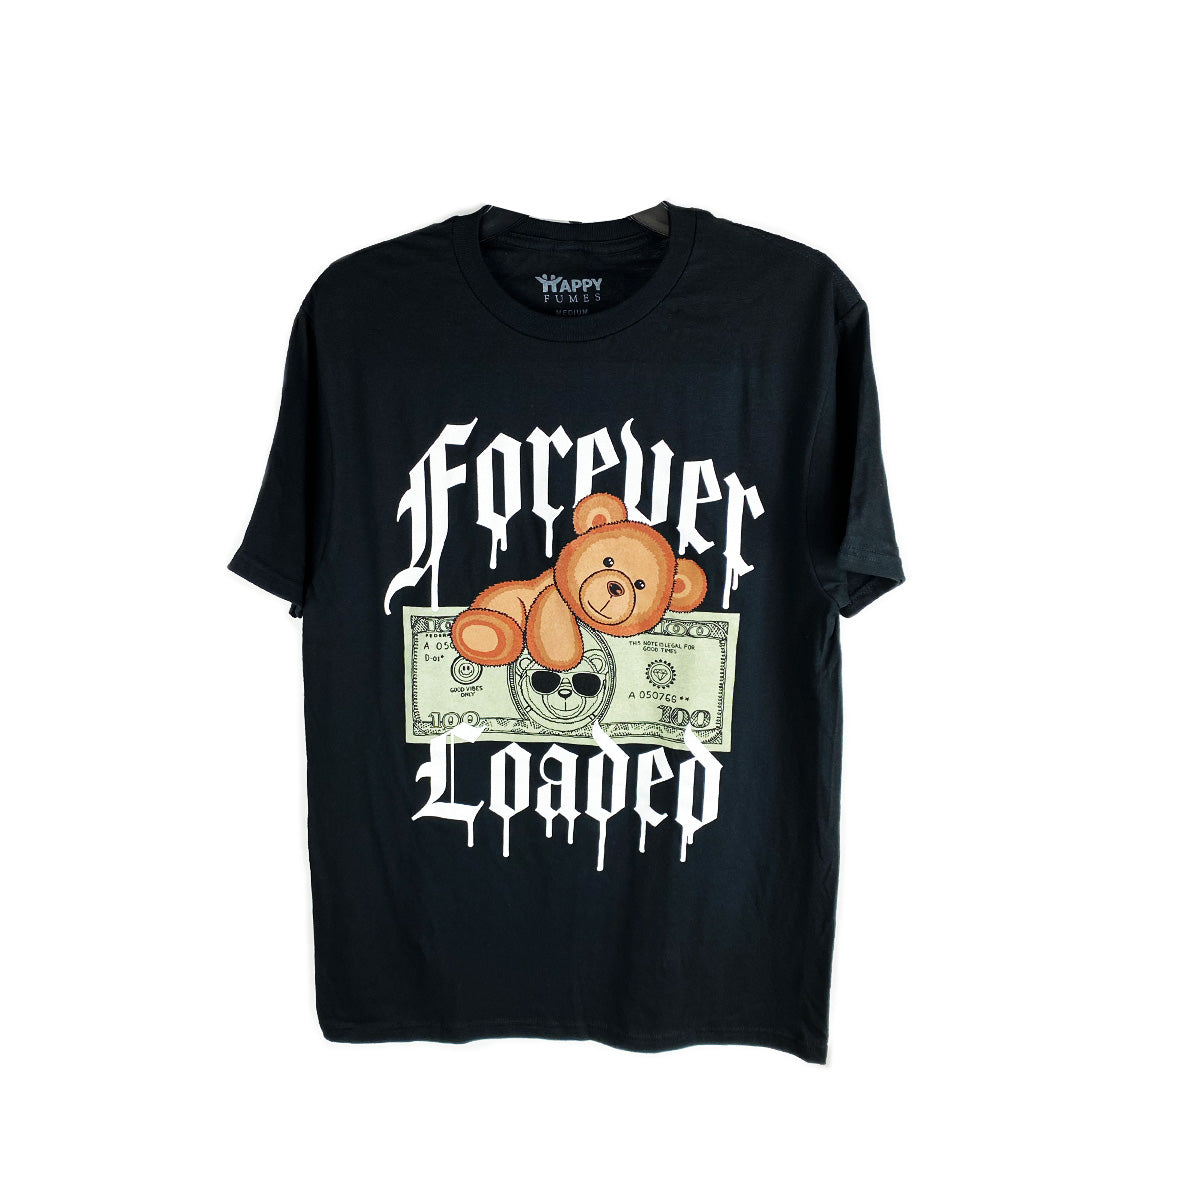 Forever Loaded 100% Cotton T-SHIRT, Pack of 6 Units 1S, 2M, 2L, 1XL